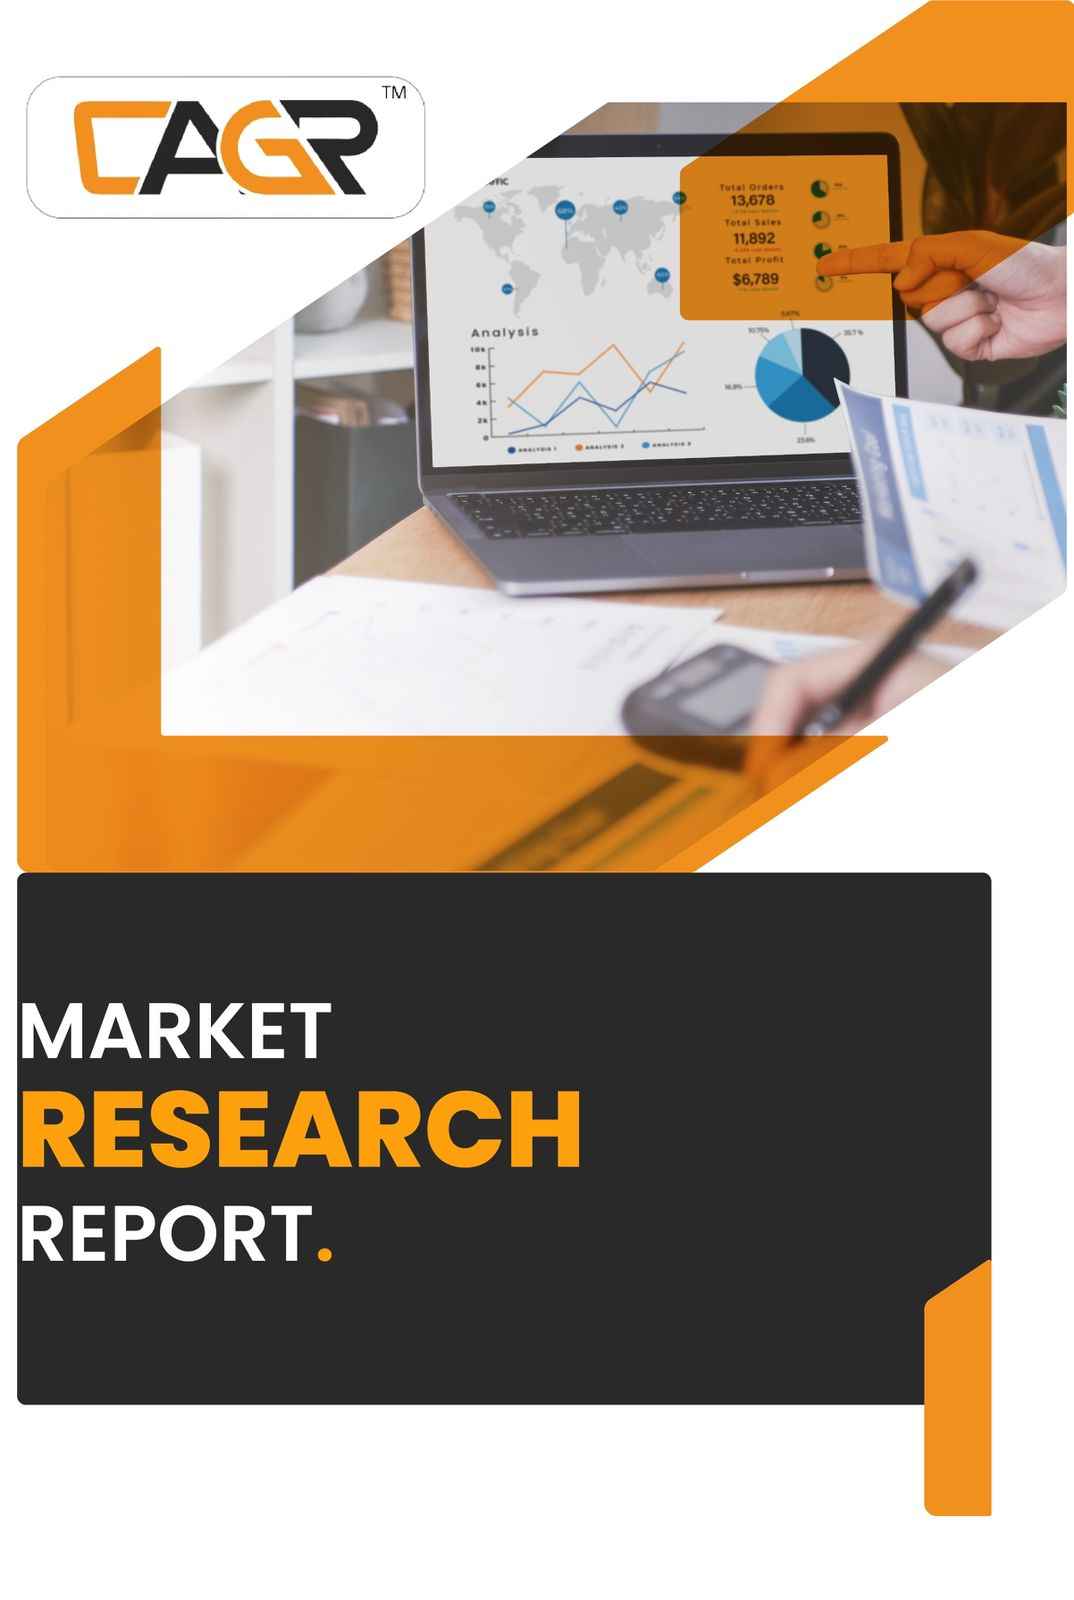 Global 2-Phase Switched Reluctance Motor Market Status, Trends and COVID-19 Impact Report 2022